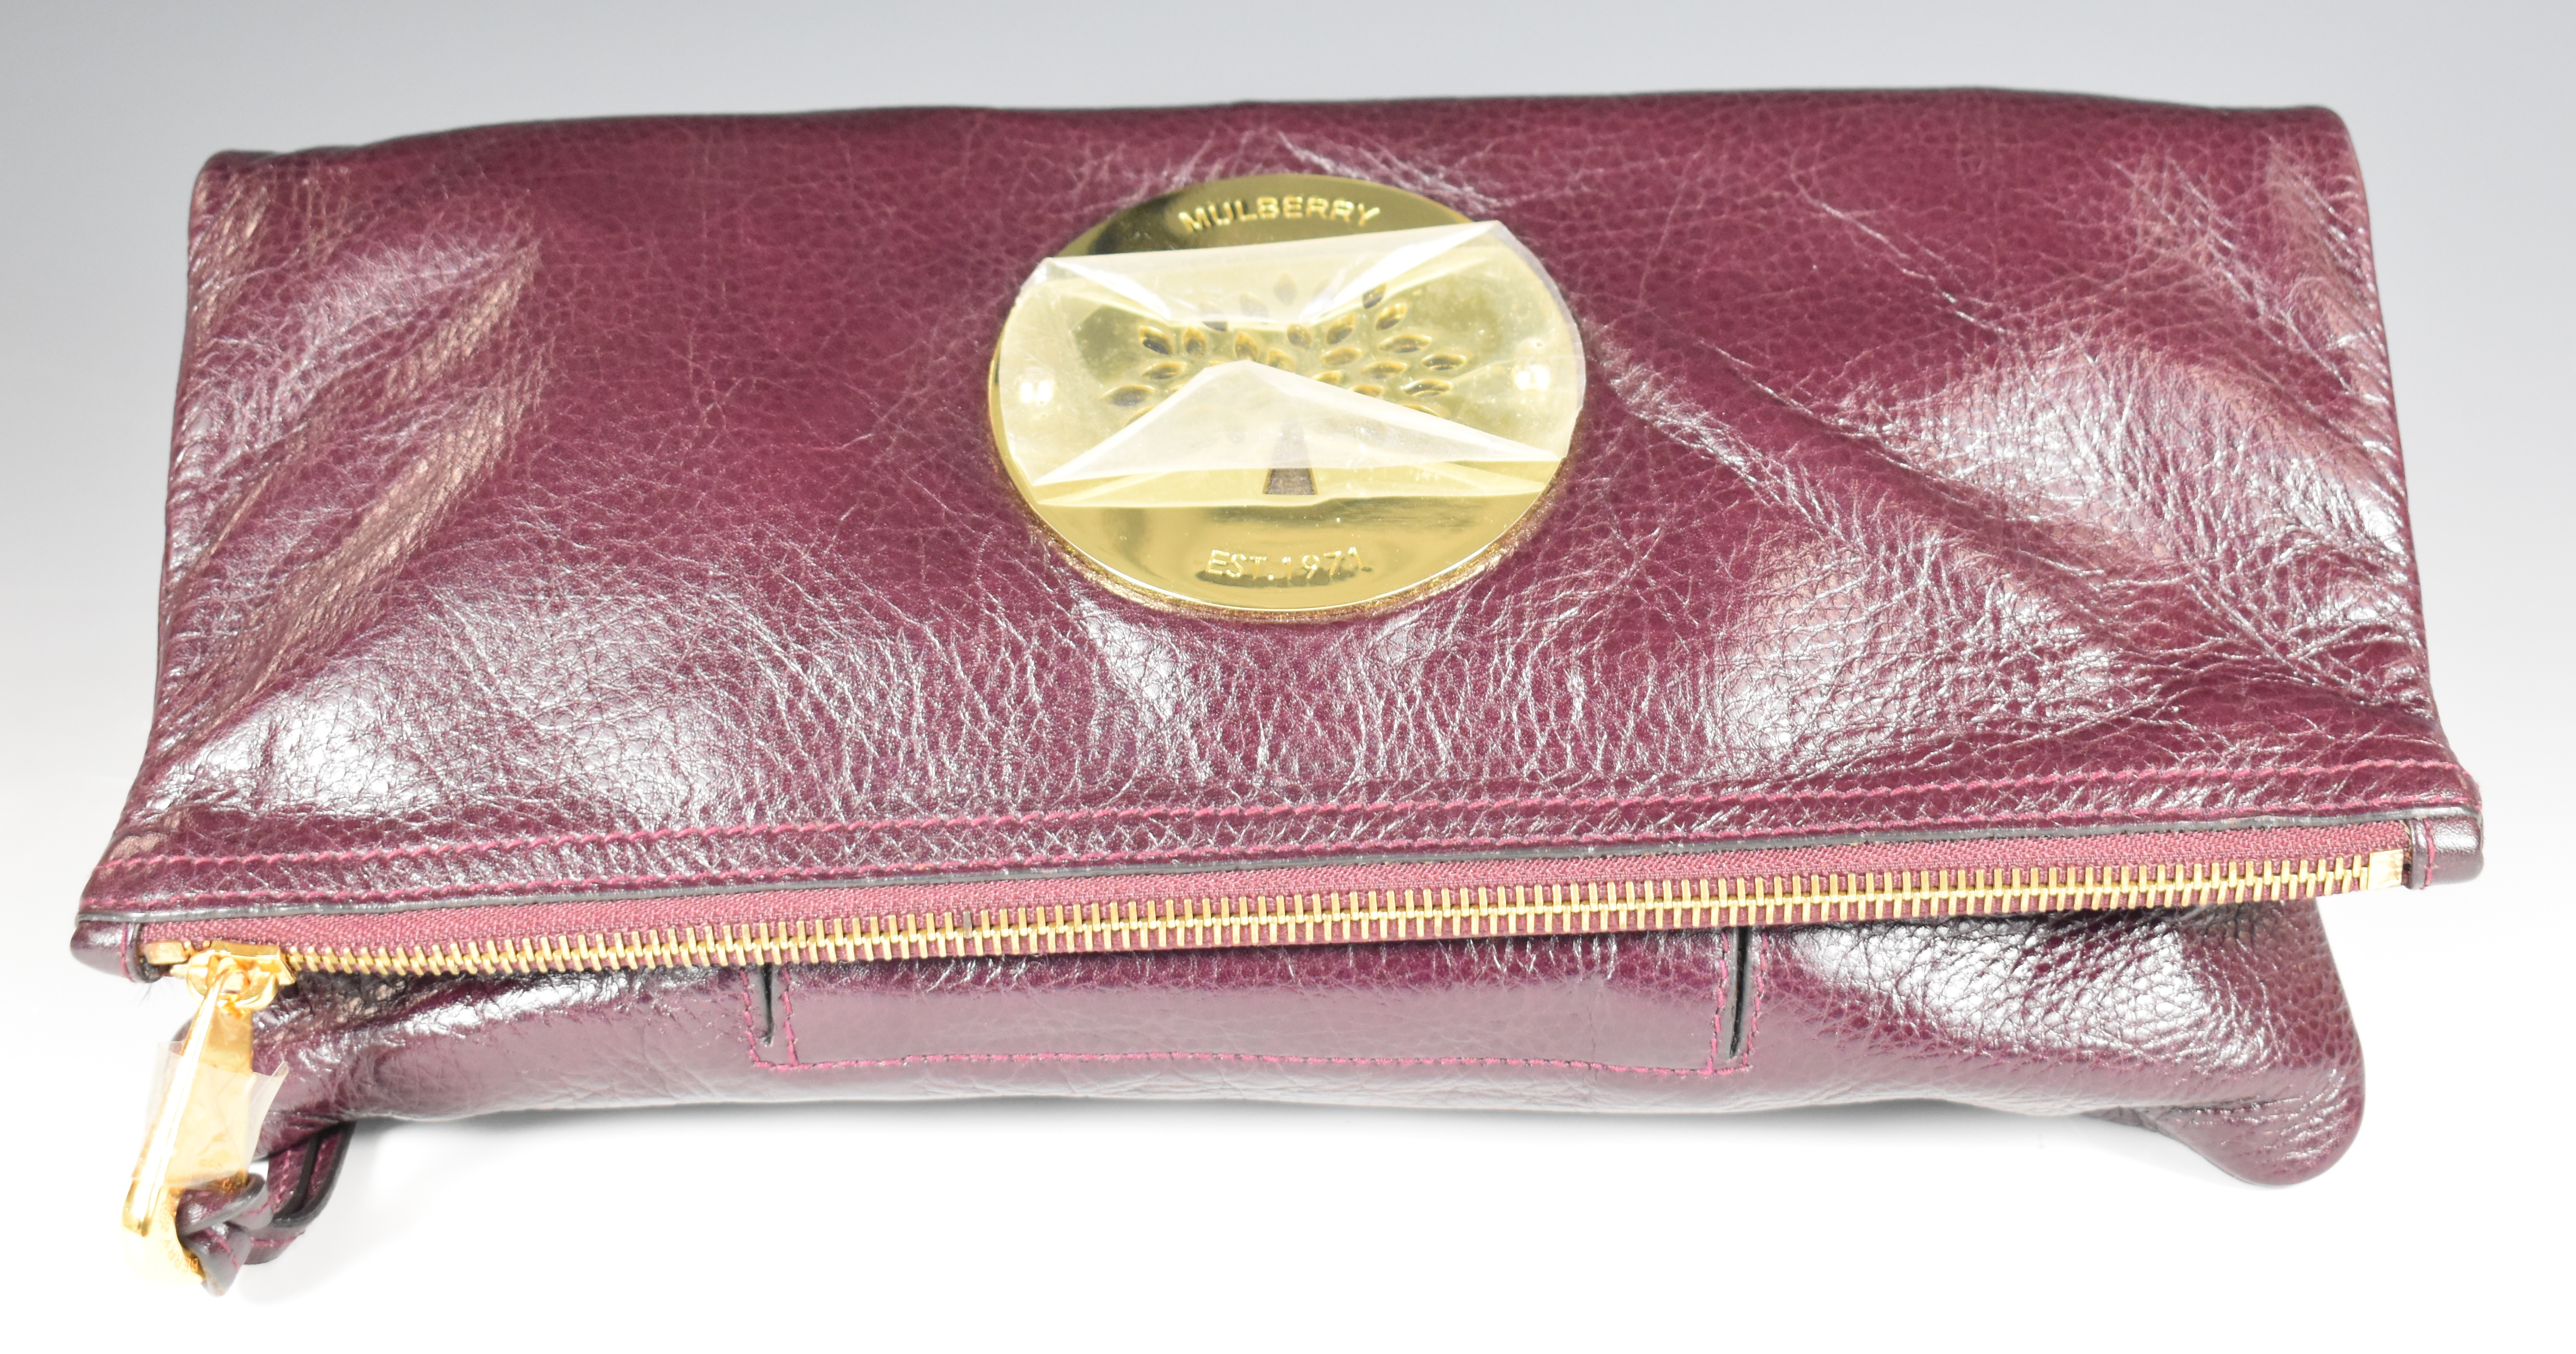 Mulberry Daria clutch bag in oxblood grained leather with gilt metal hardware, original label, - Image 2 of 9